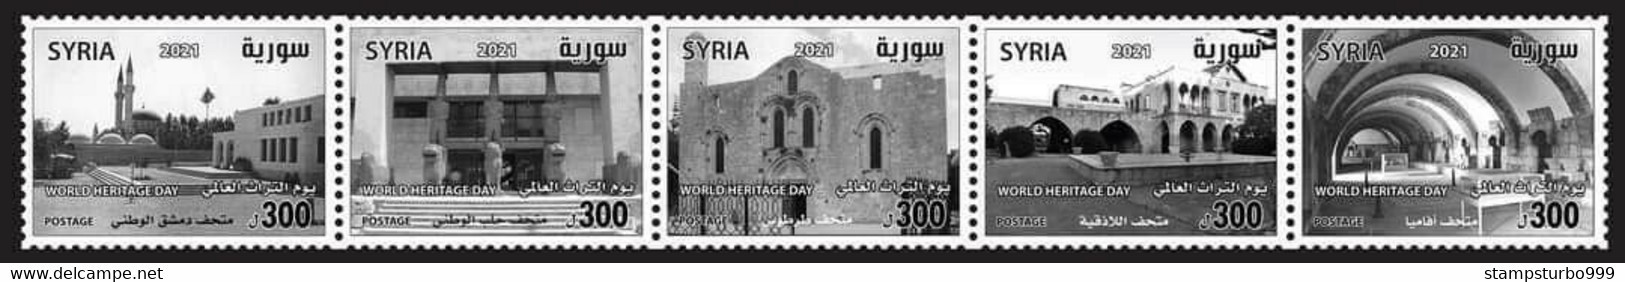 Syrie, Syrien, Syria 2021 New Issued World Heritage Day Set, MNH** - Syrien